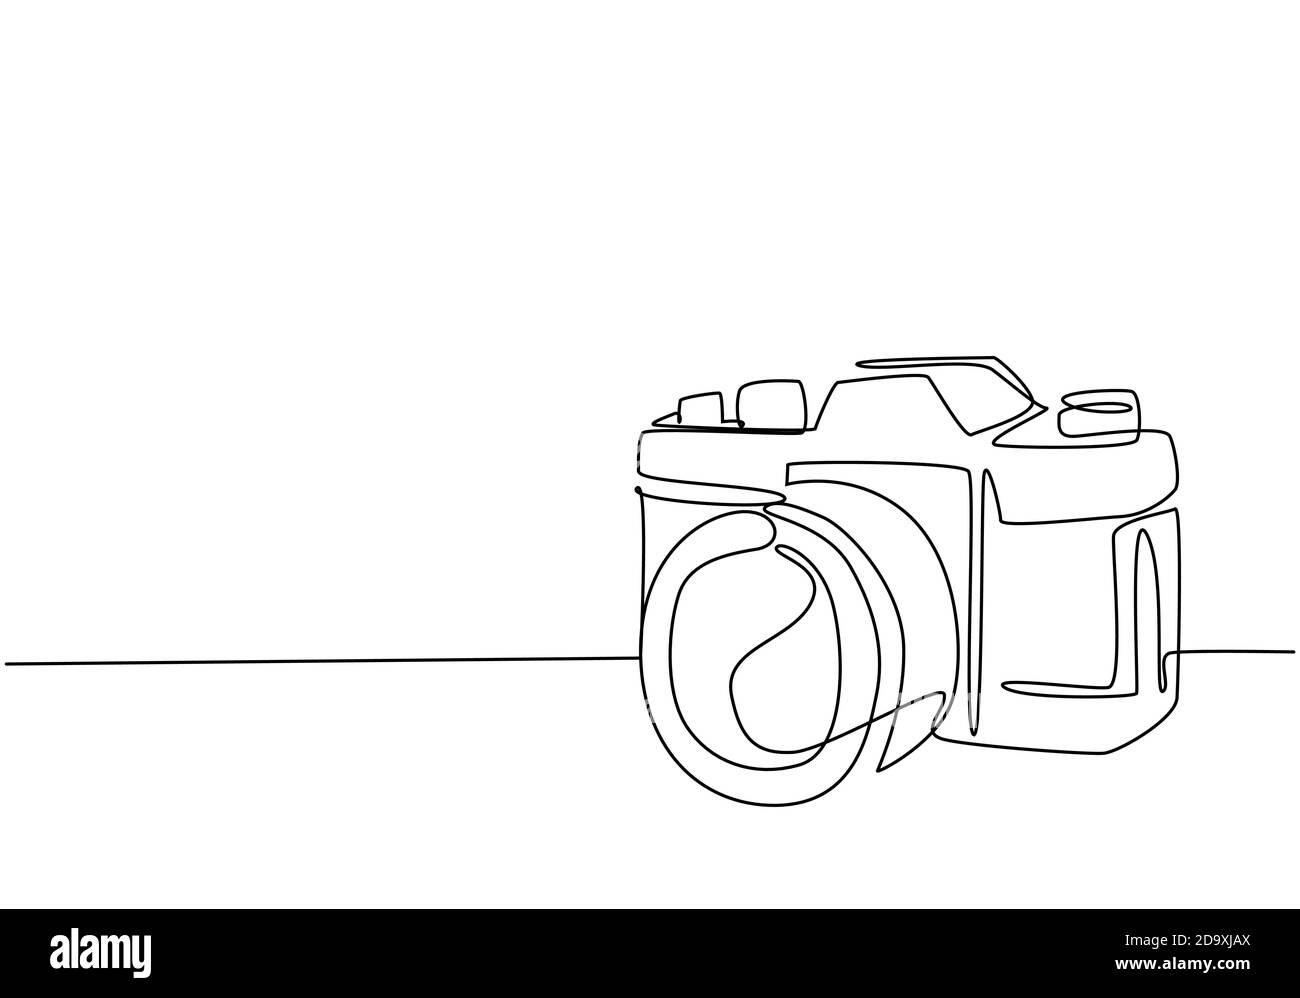 One single line drawing of old retro analog slr camera with telephoto lens. Vintage classic photography equipment concept continuous line draw graphic Stock Vector